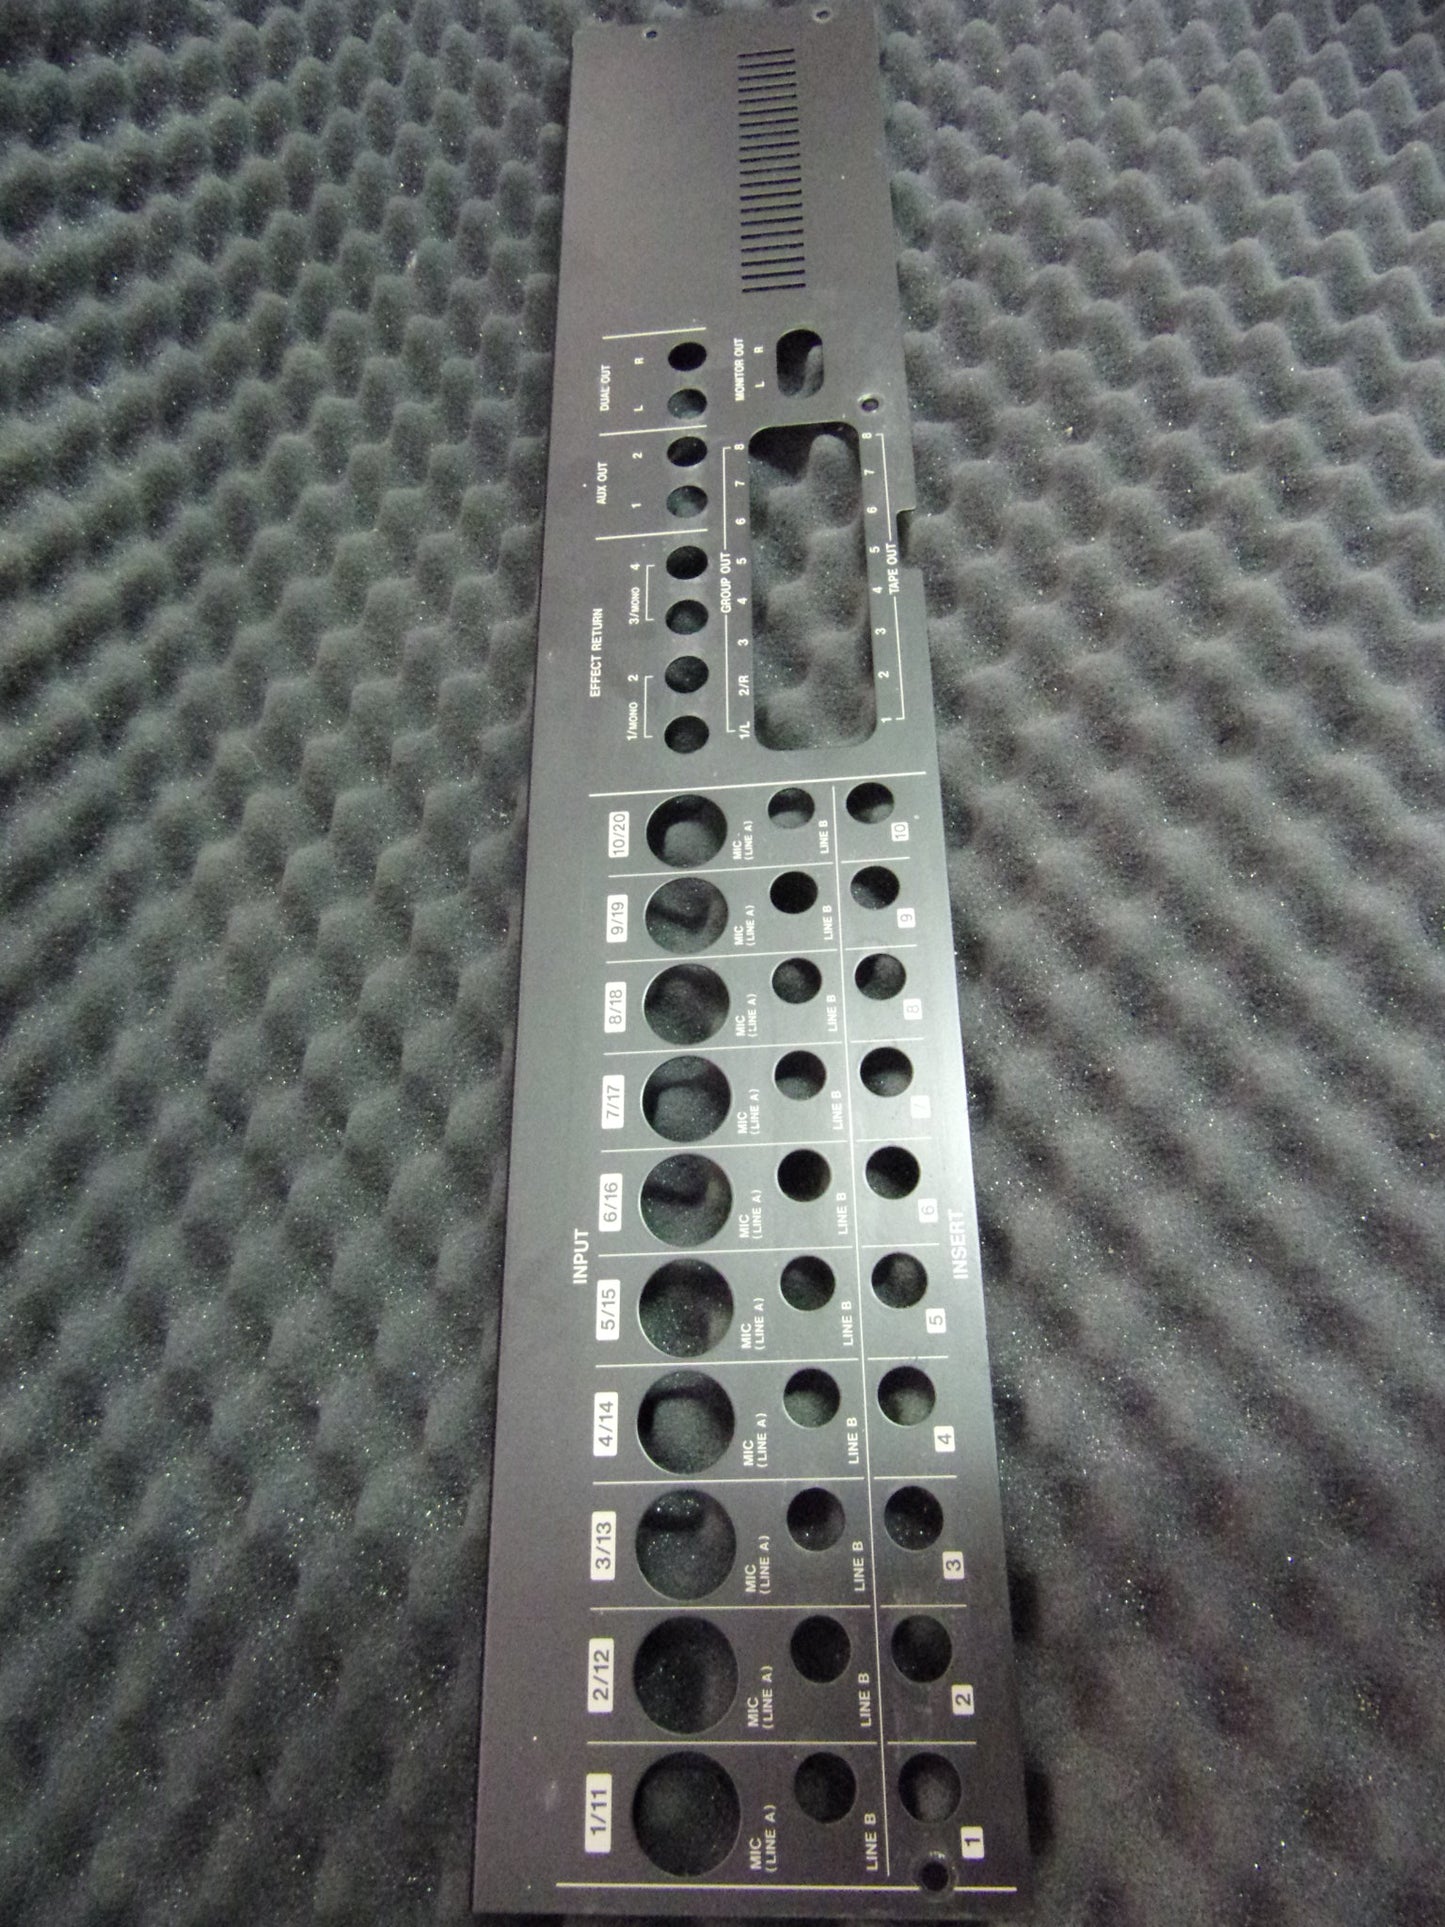 Tascam 688 connector panel